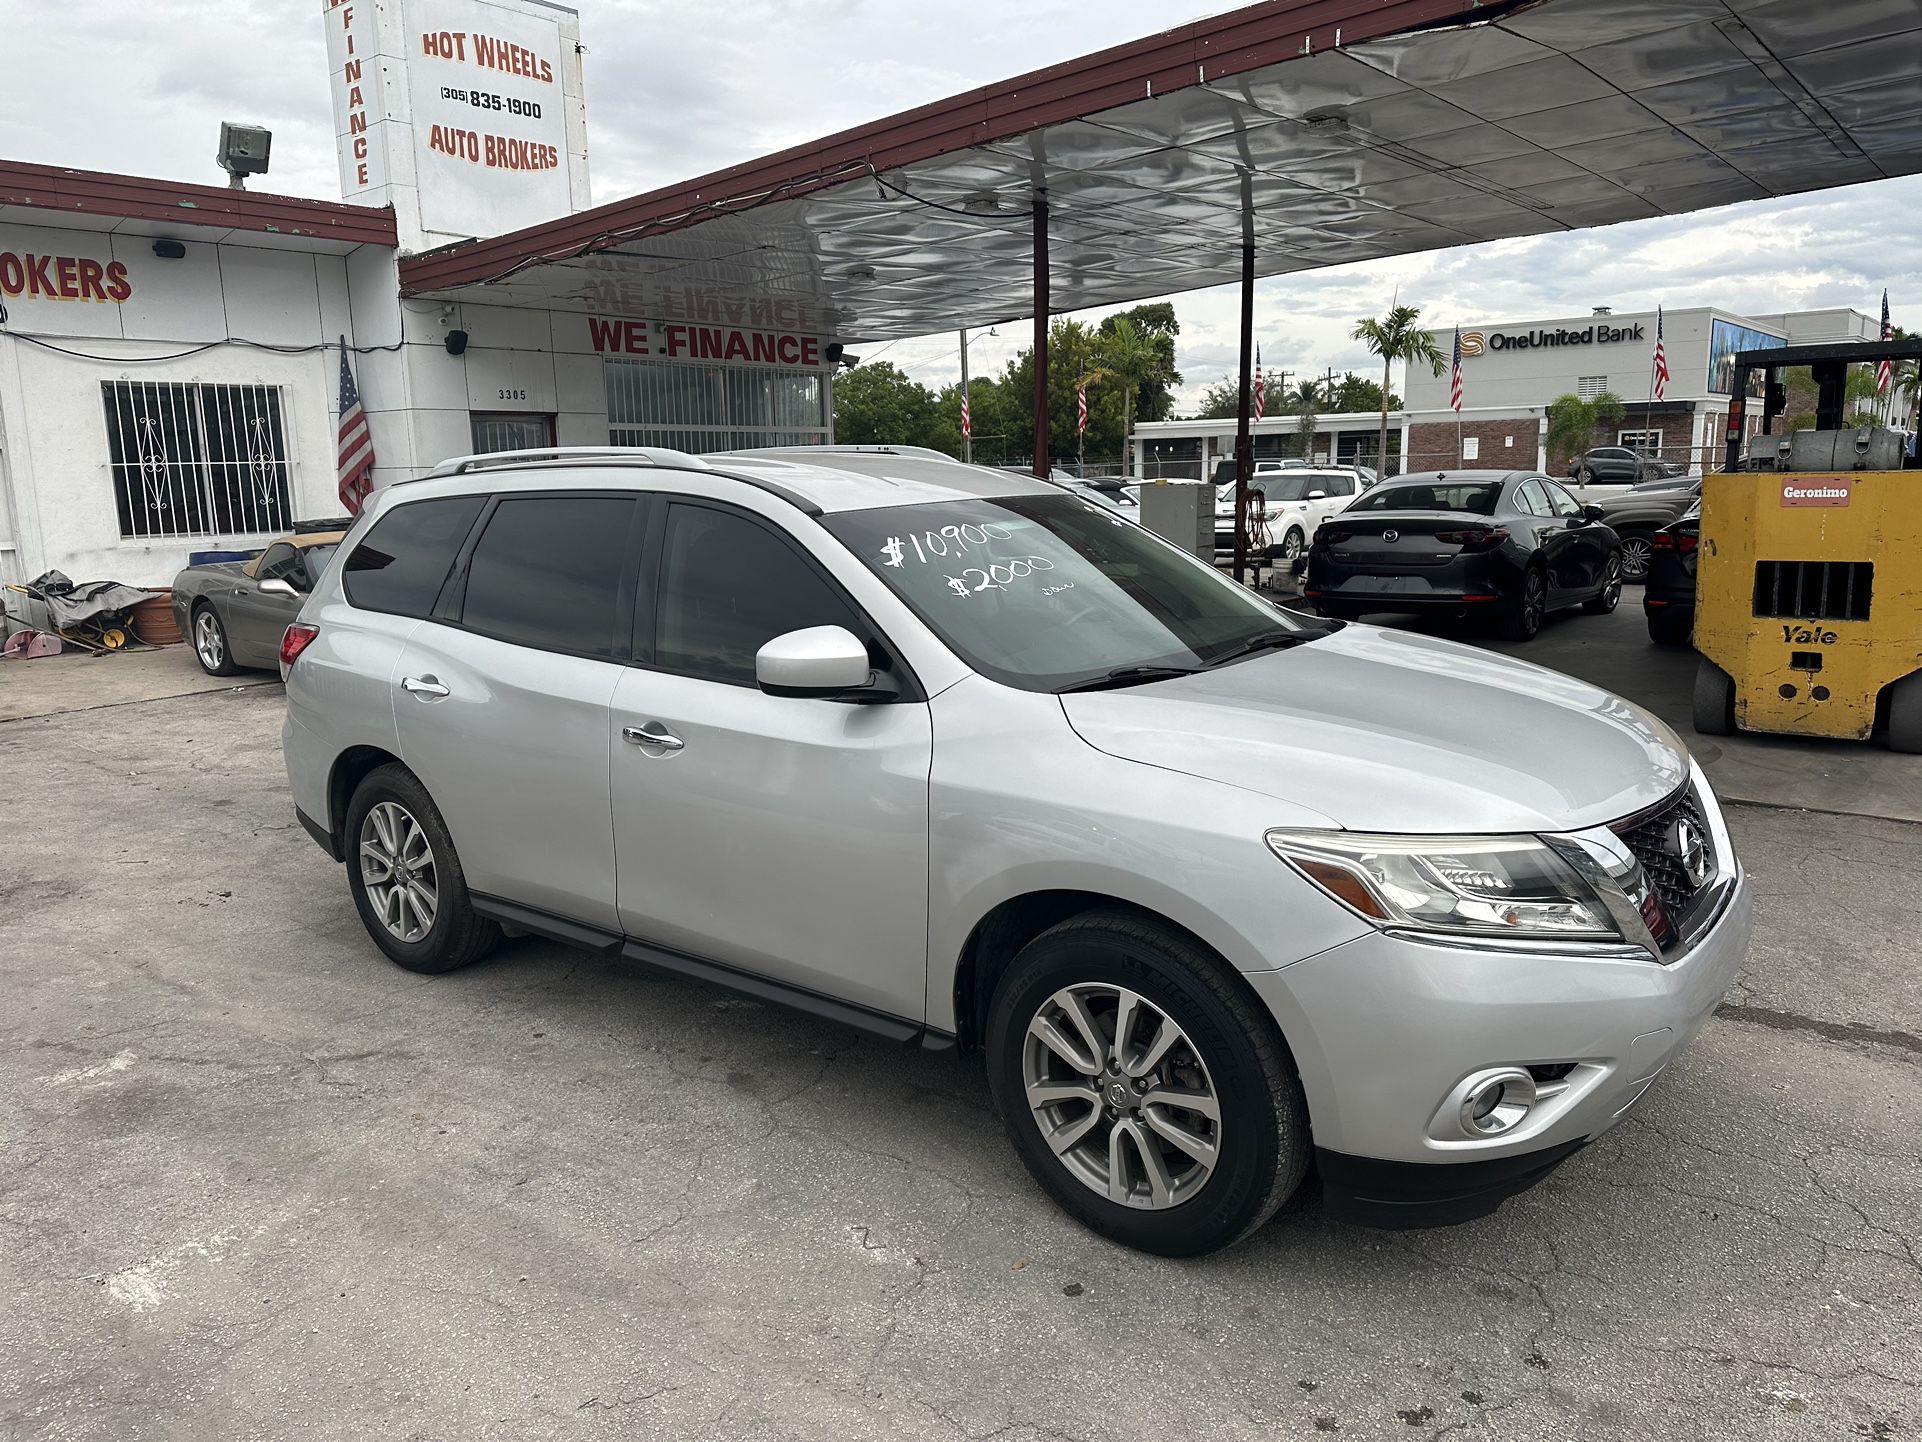 used 2015 nissan pathfinder - front view 1